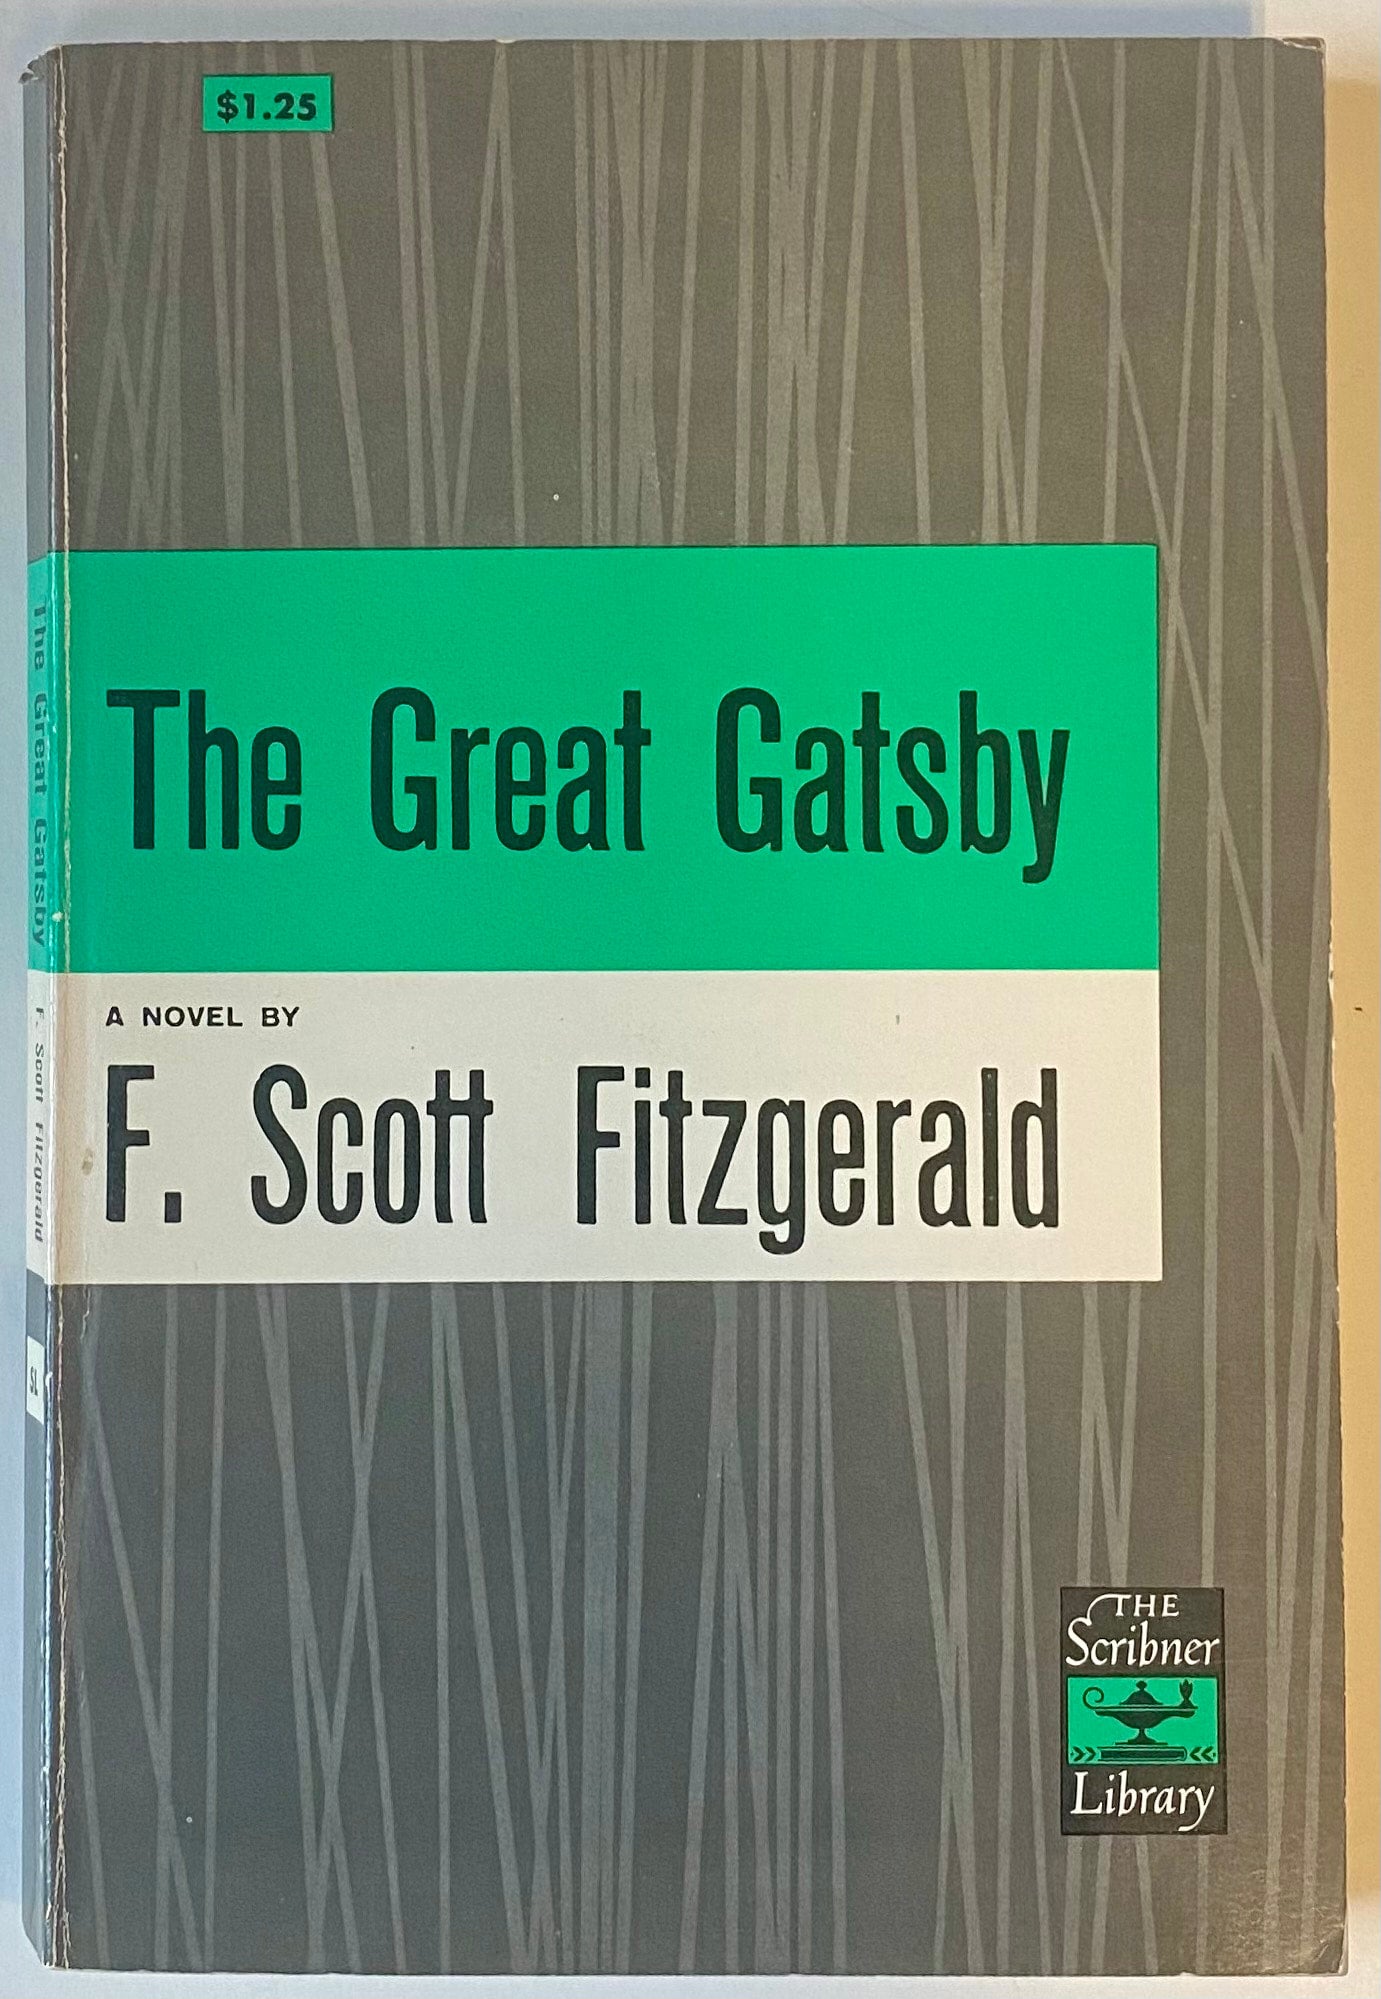 Books　Fitzgerald,　Great　by　Scott　The　Heritage　Gatsby　F.